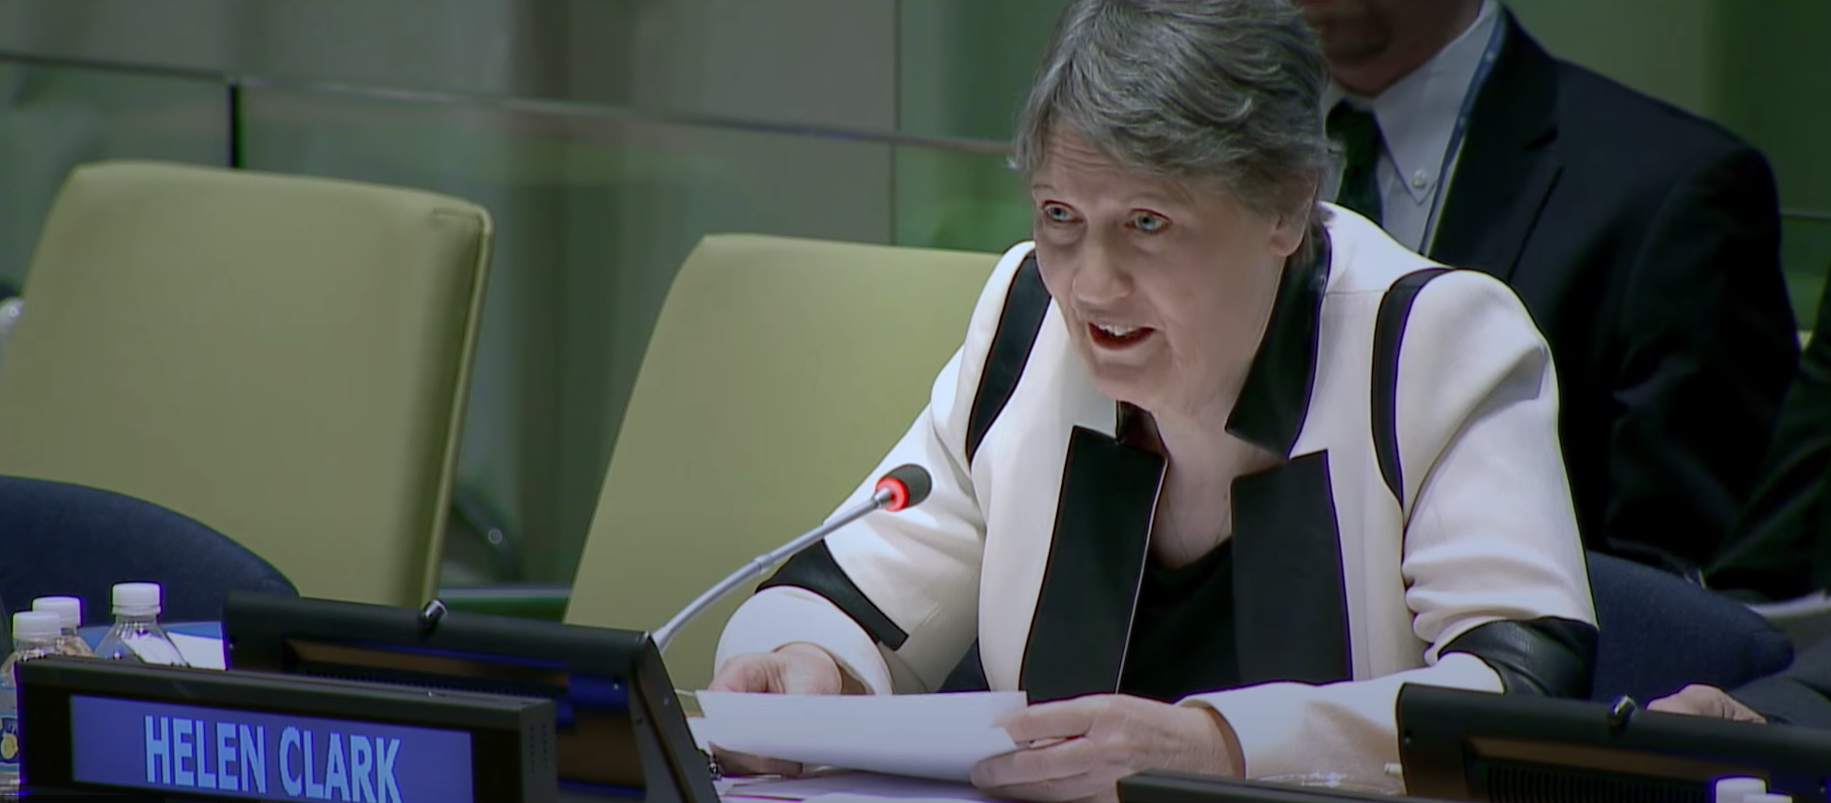 Helen Clark during her campaign for the post of UN Secretary General, 2016